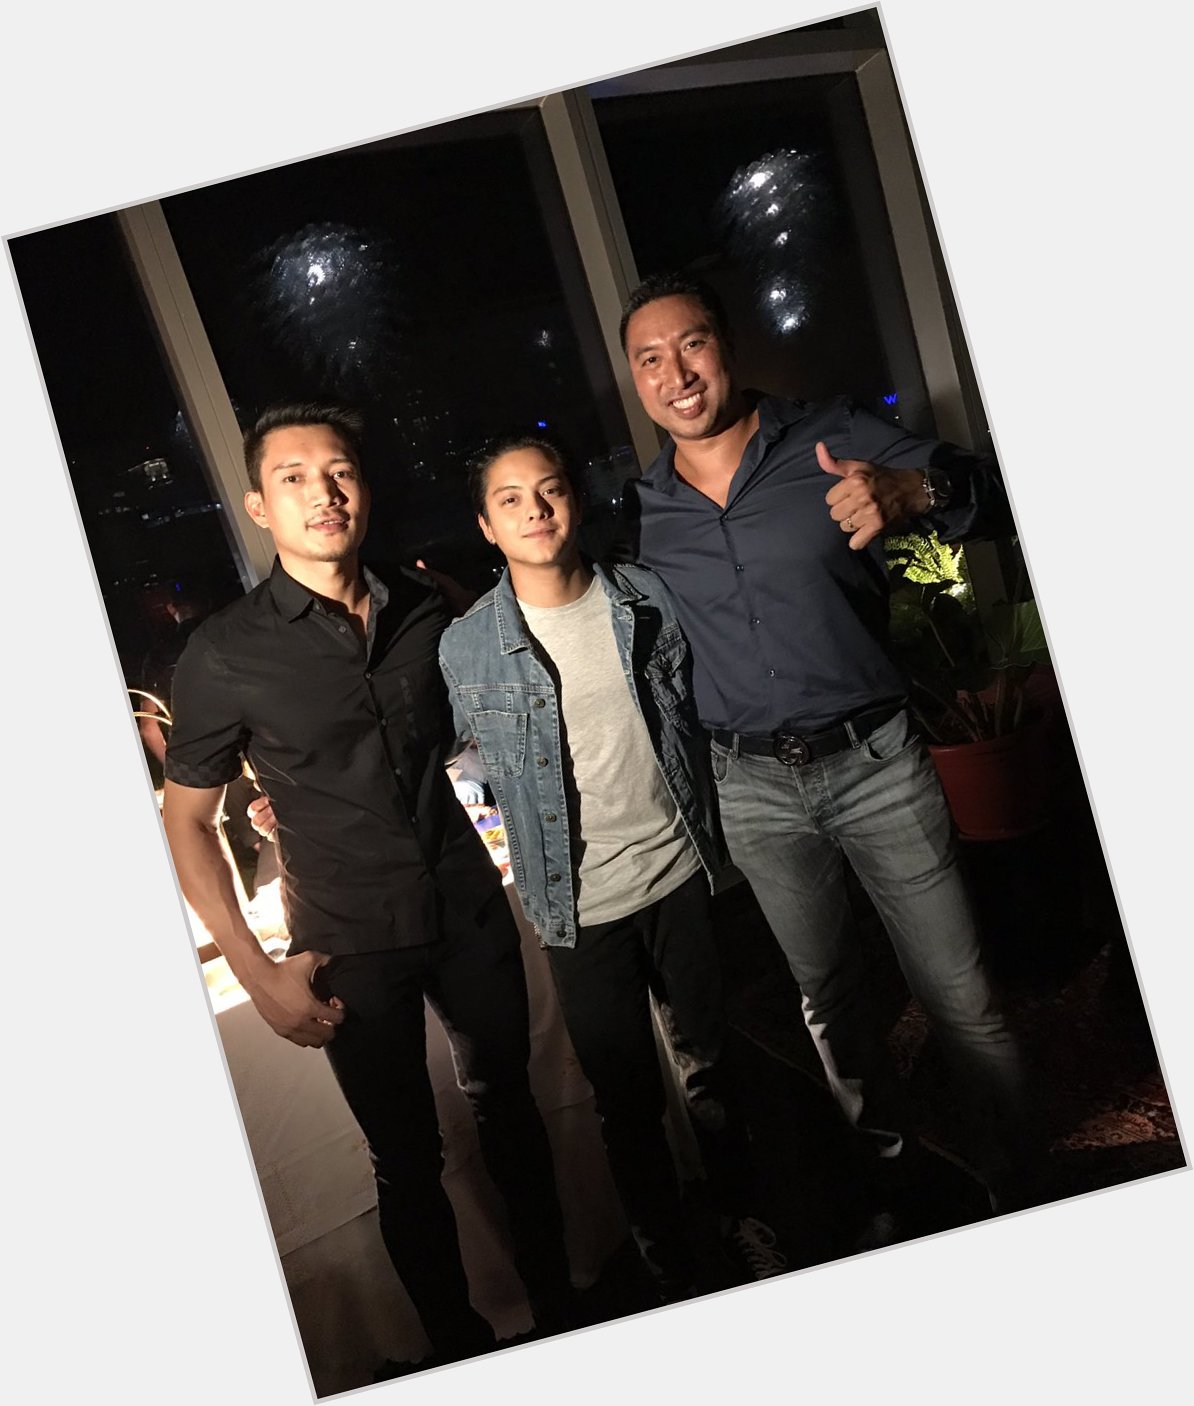 \" Happy surprise birthday to our dear friend and business partner, Daniel Padilla  